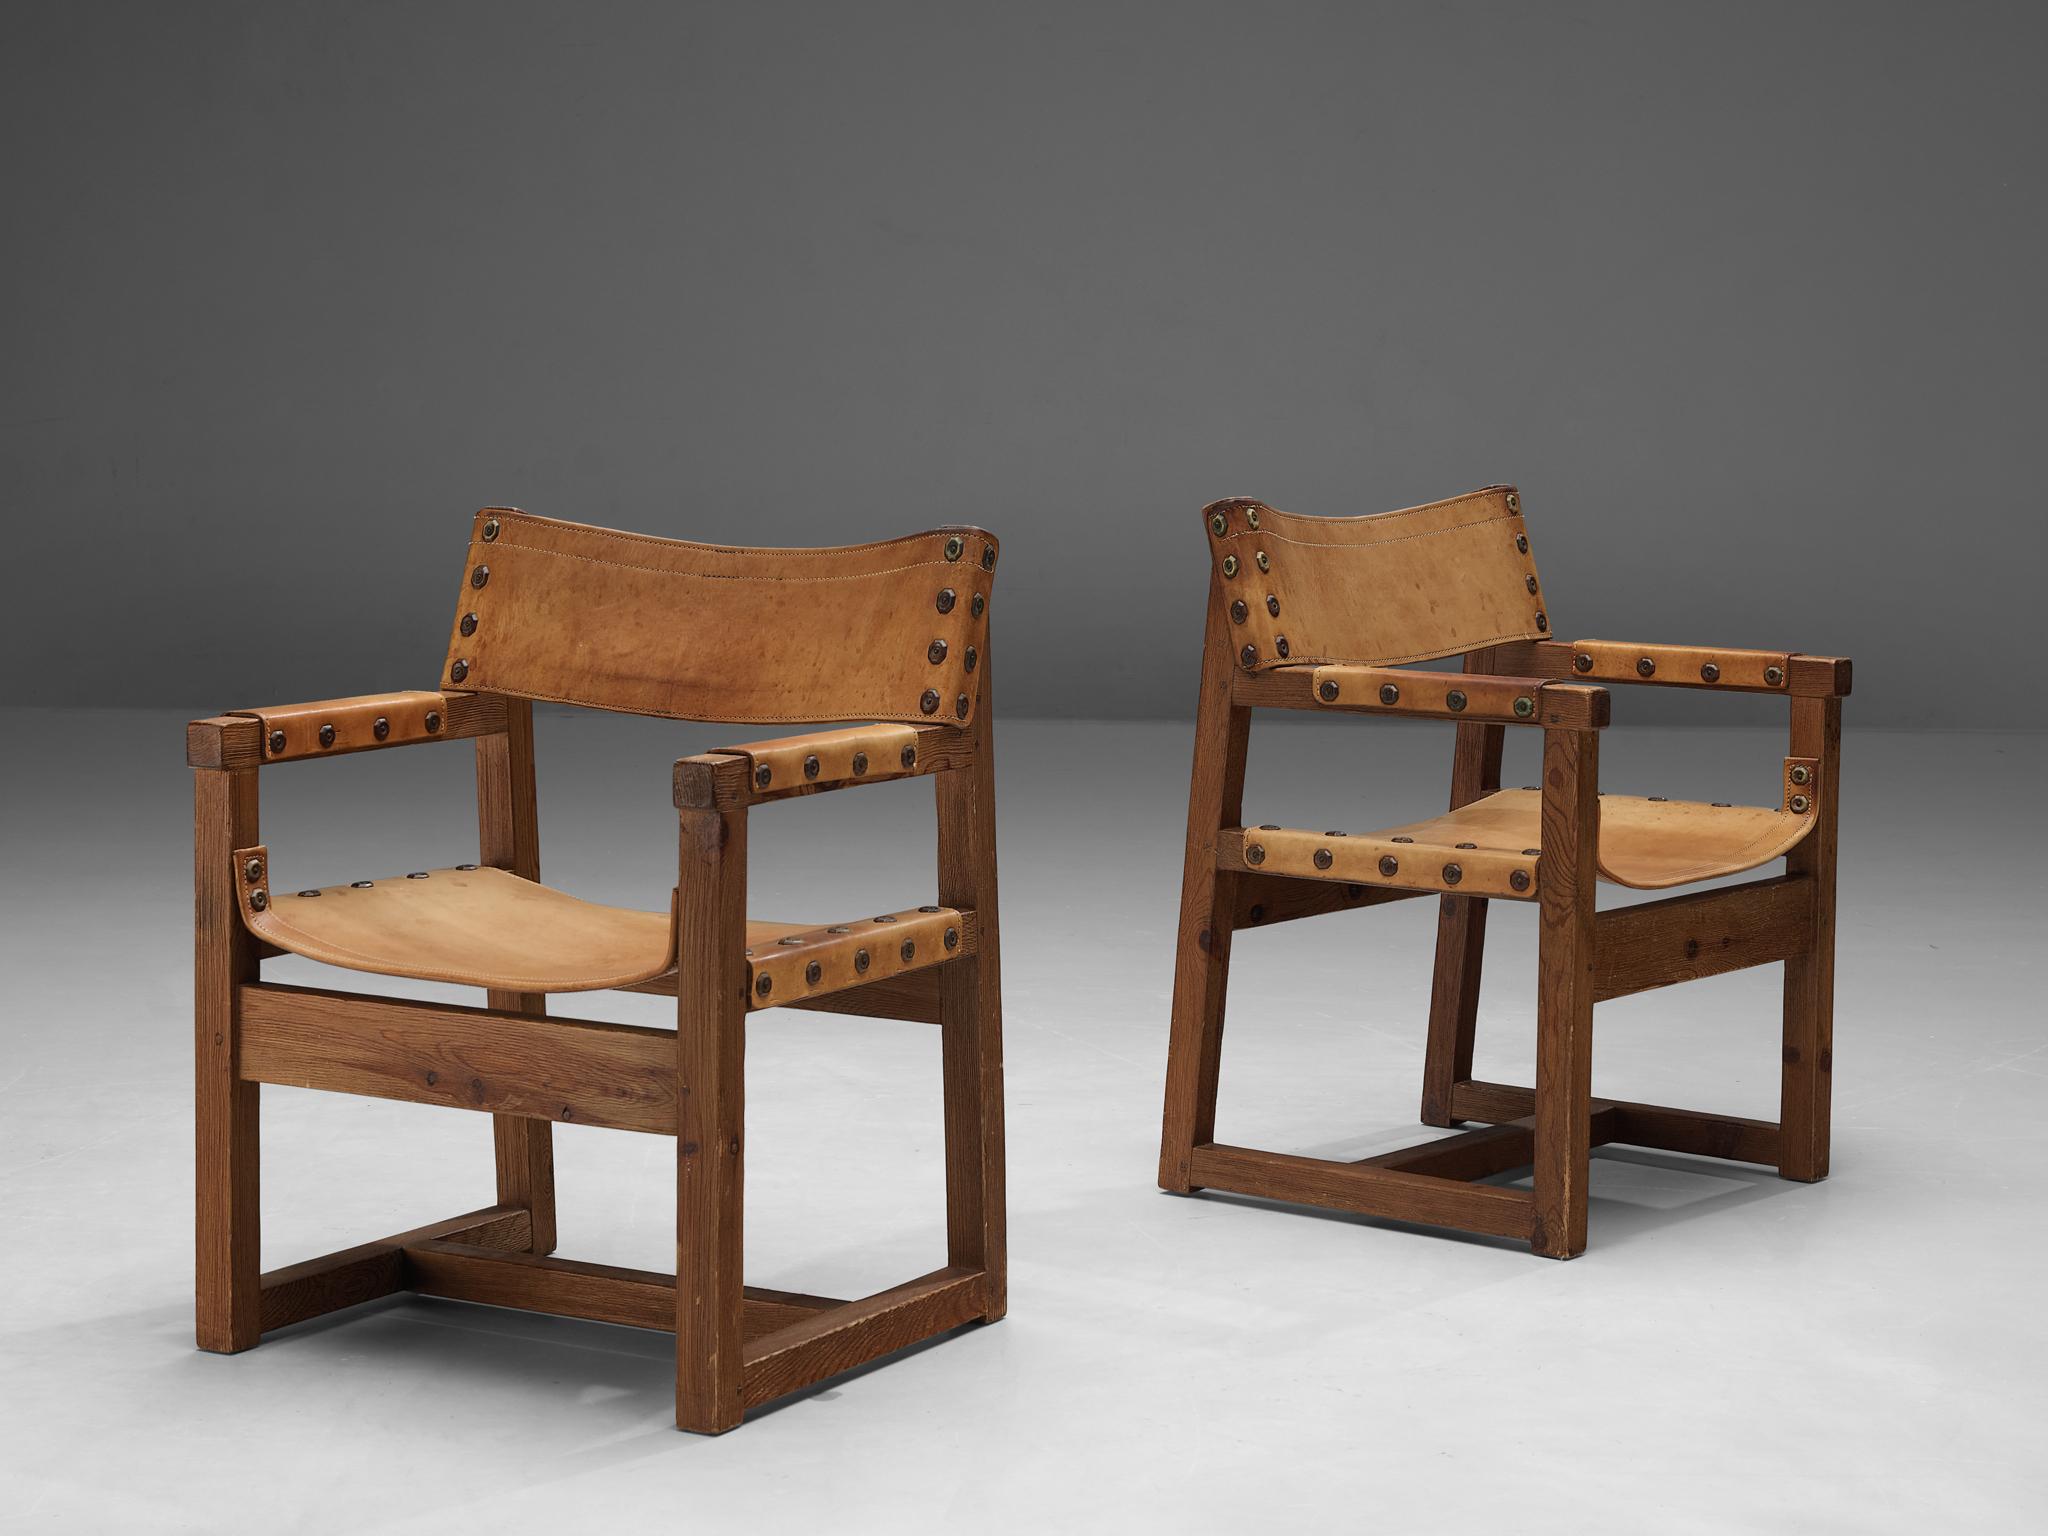 Biosca, pair of chairs, leather, pine, Spain, 1950s 

Sturdy chairs manufactured by the Spanish Biosca. These chairs are made out of pine and have stunning, leather seating. The chairs have a robust look, which is emphasized by decorative nails that